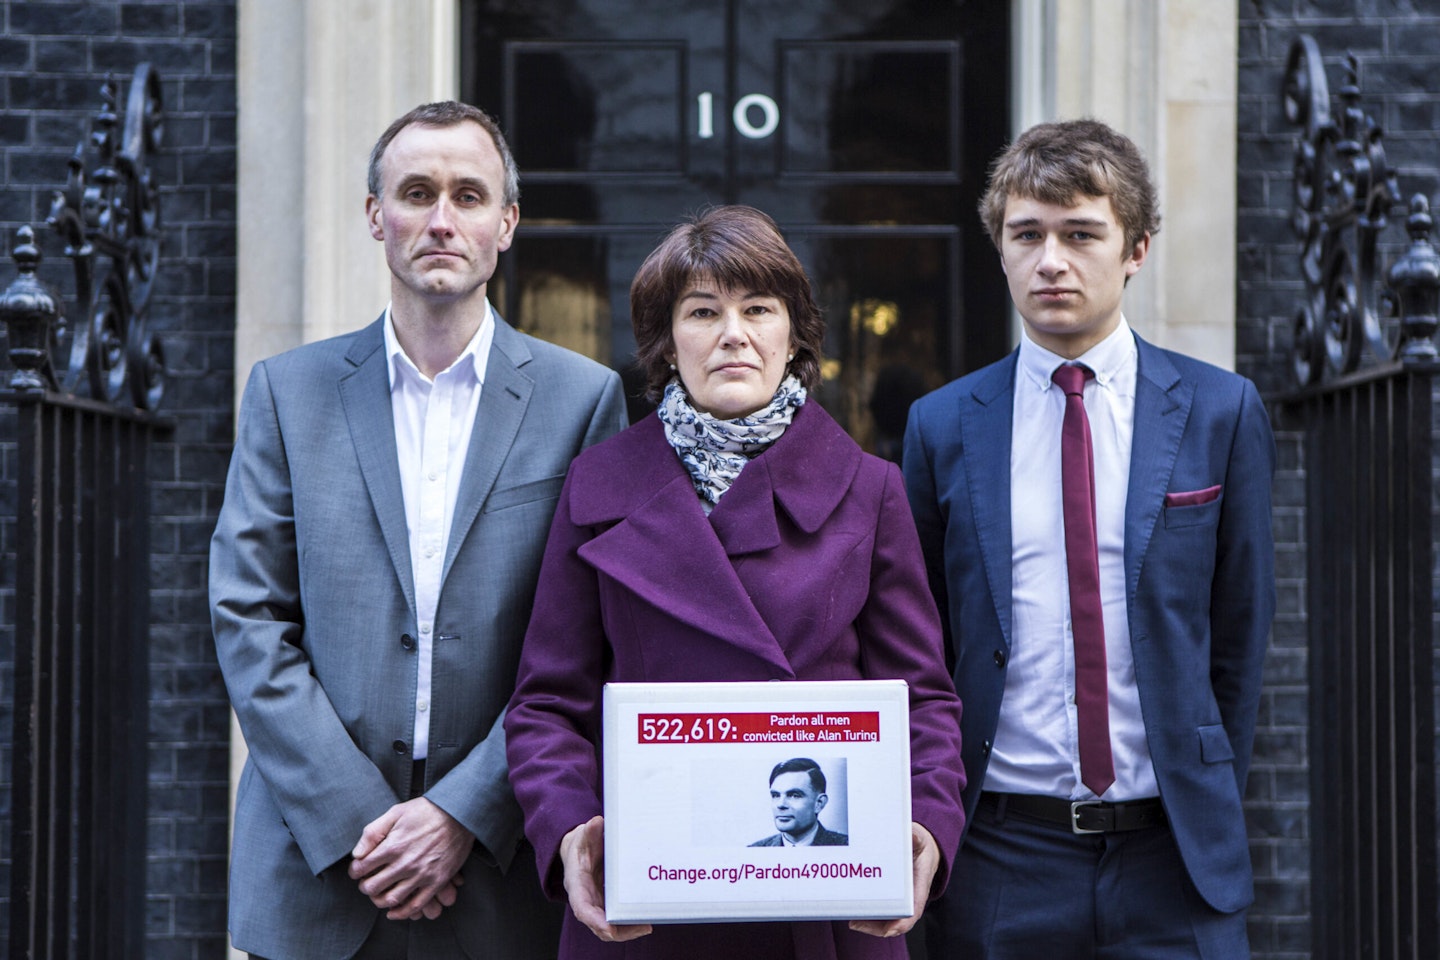 Turing’s relatives Nevil Hunt (great nephew), Rachel Barnes (great niece), Thomas Barnes (great great nephew) deliver a petition to 10 Downing Street calling for a pardon for more than 49,000 British men convicted under historic anti-gay laws in the UK. The pardon was granted in 2017.